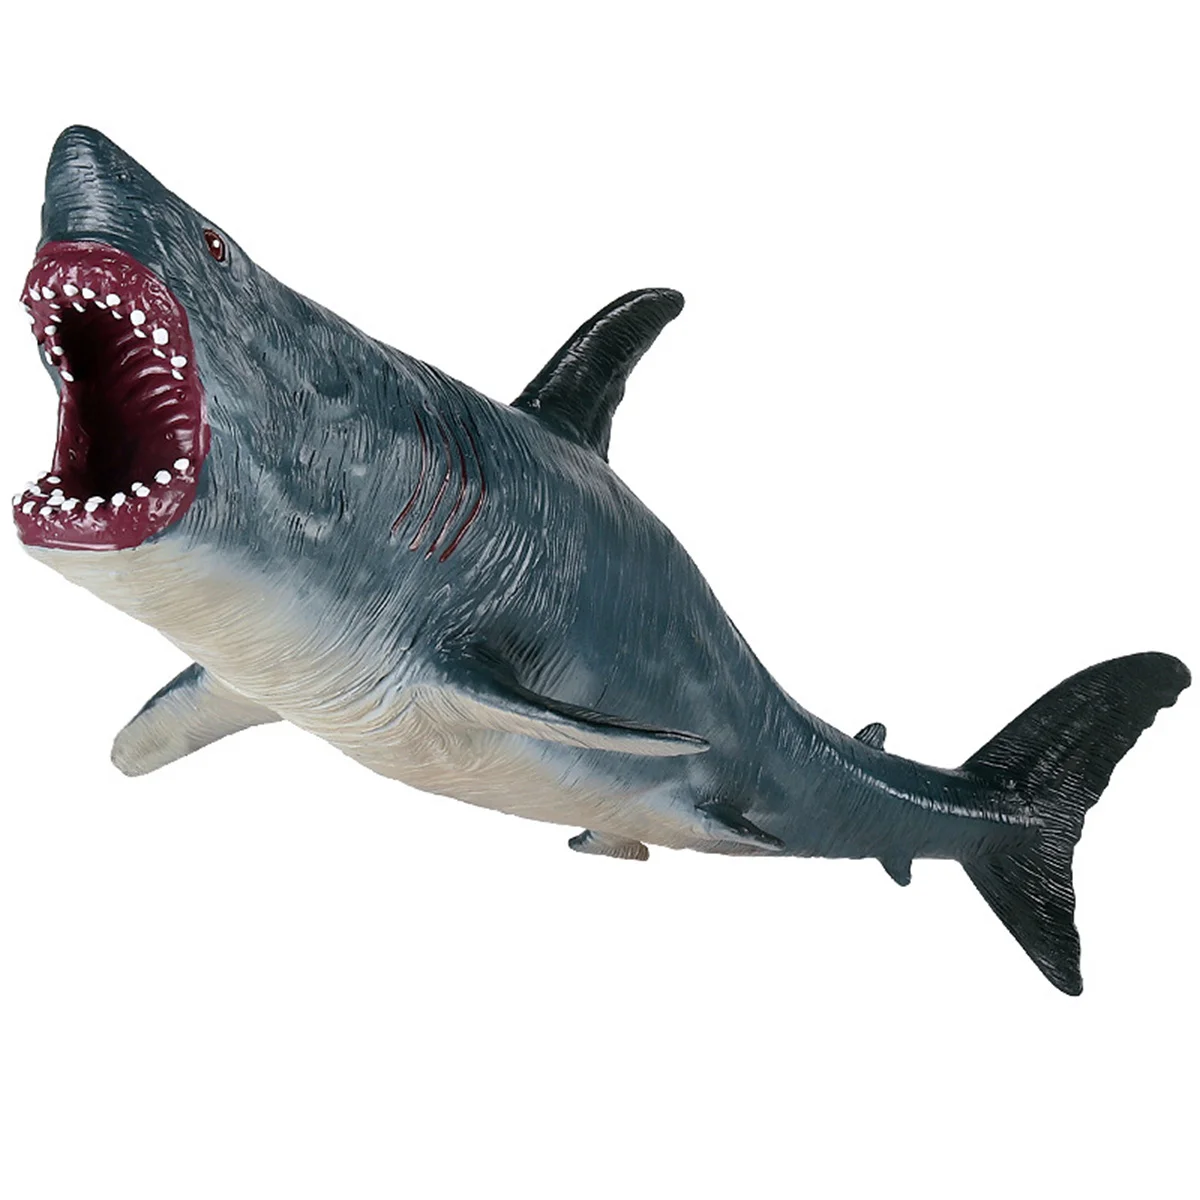 In Stock Large Size 13'' Megalodon Model Animal Figure Scene Hollow Shark  Decor Toy For Children Carcharocles Collection Gift - Animal/dinosaur  Figures - AliExpress